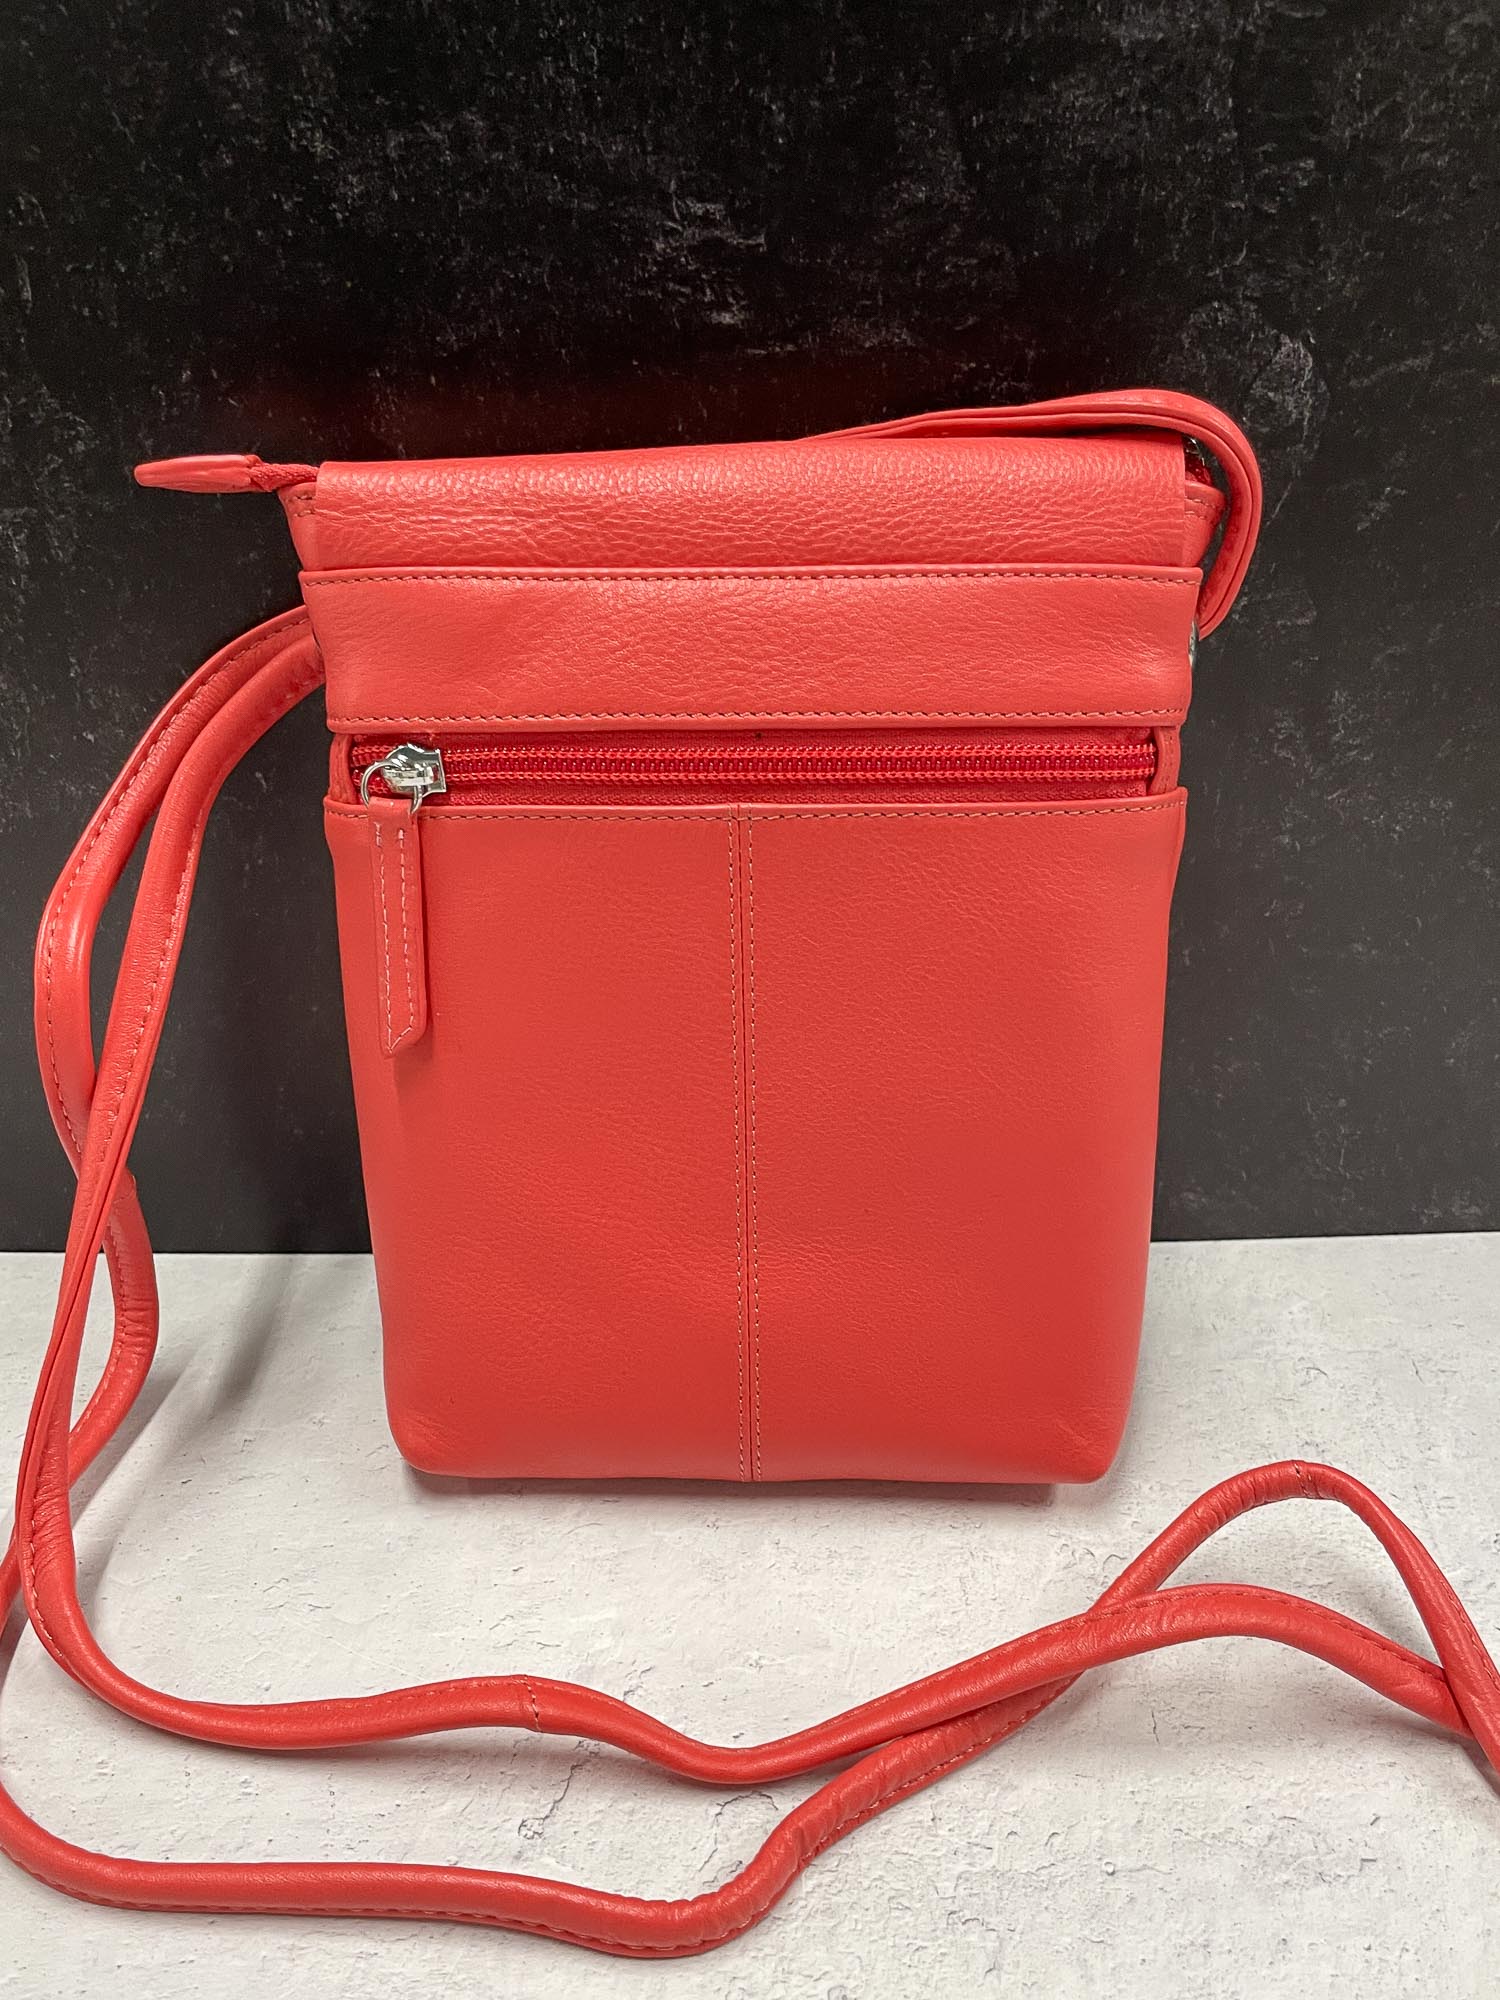 Jeff Lieb Total Design Jewelry Embellished Flap Crossbody Bag, Coral - Statement Boutique